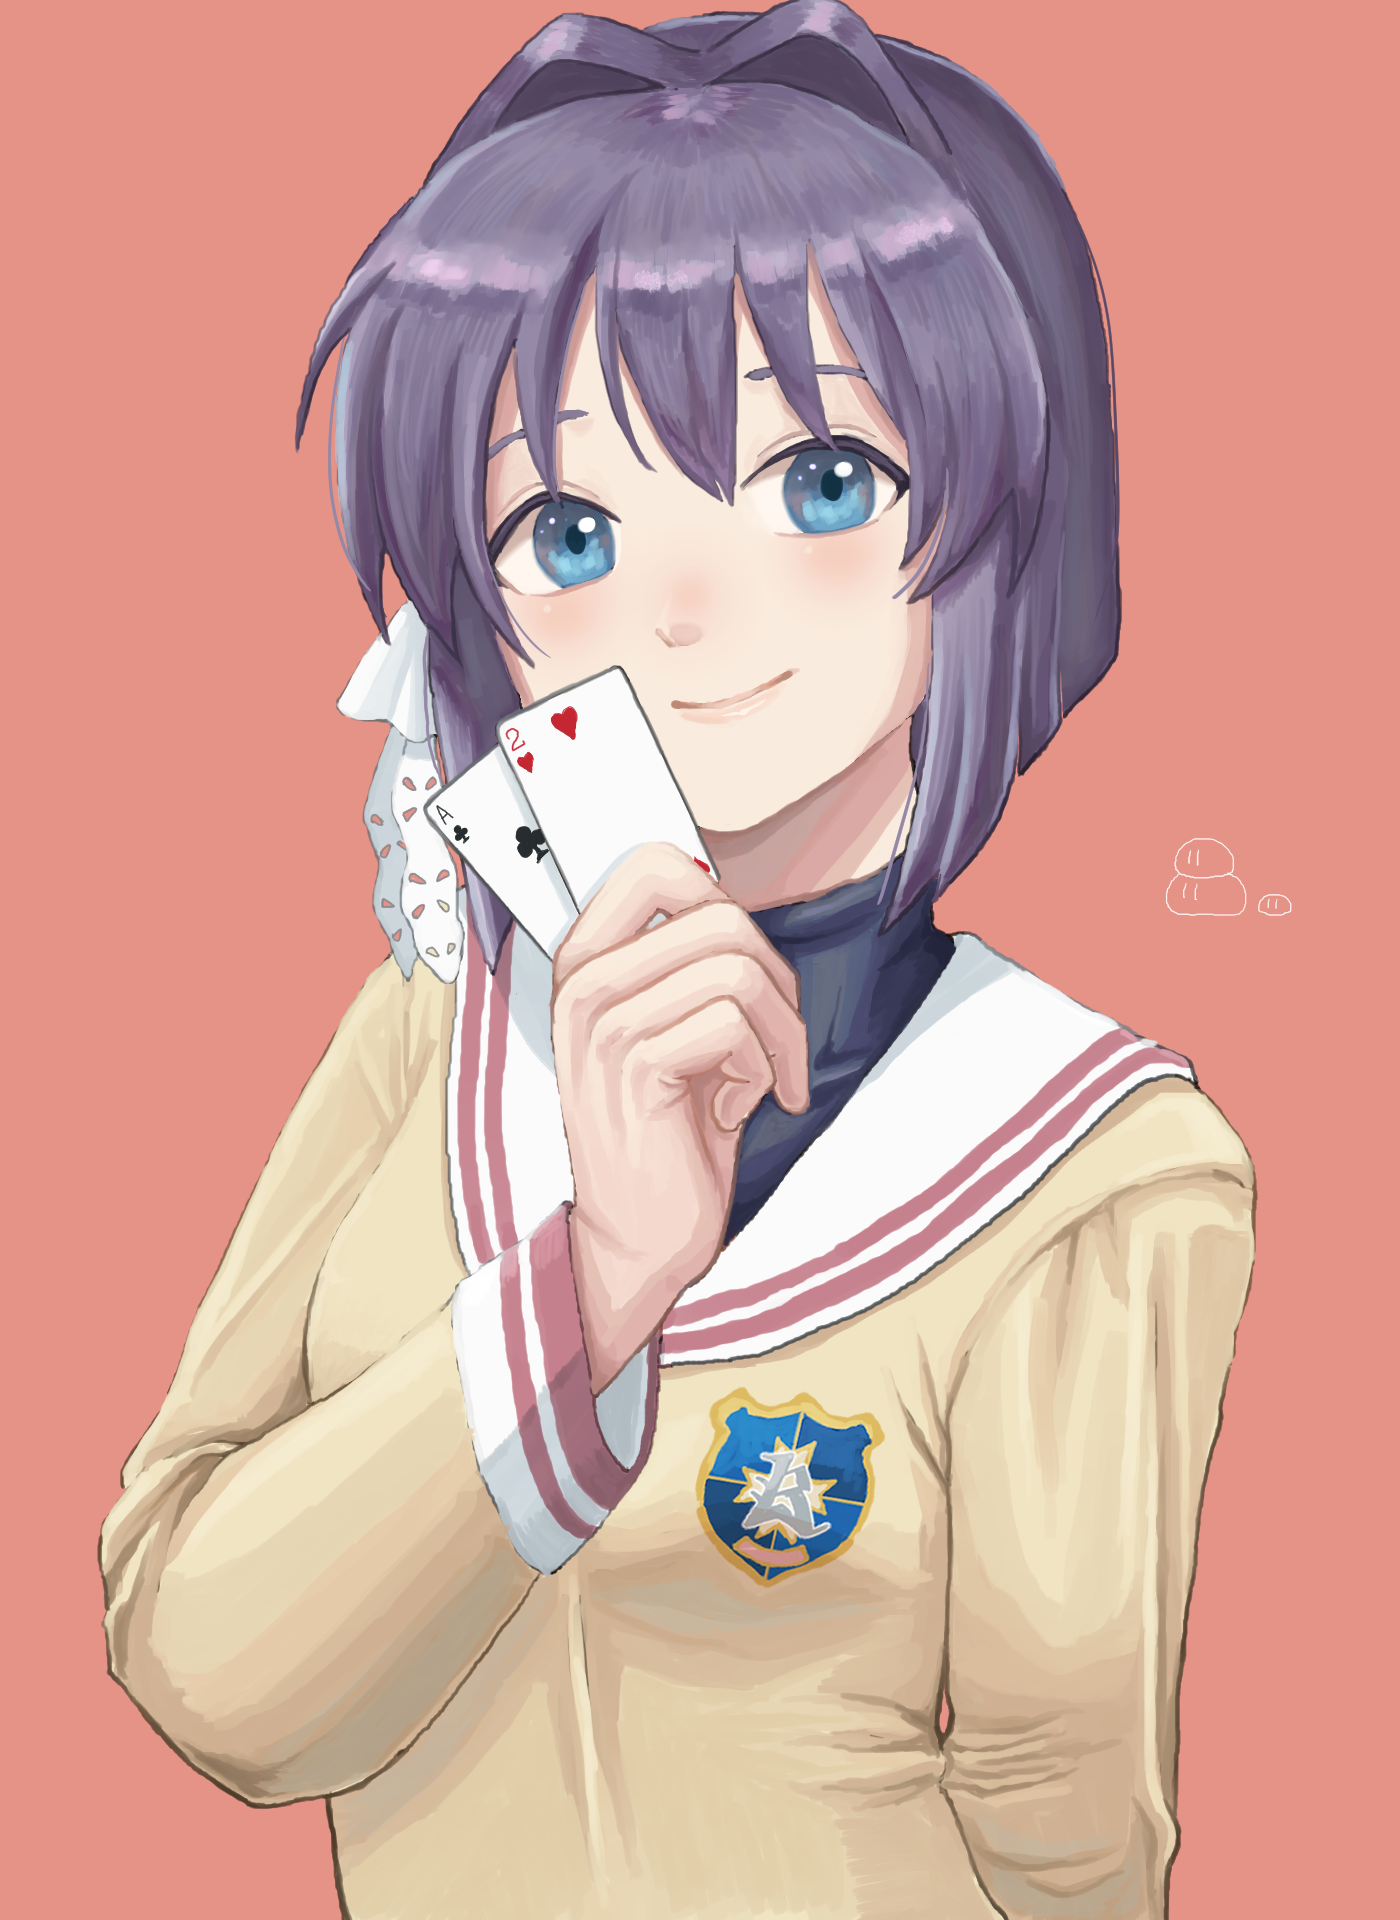 Anime 1400x1920 Fujibayashi Ryou Clannad purple hair anime anime girls artwork digital art fan art shoulder length hair simple background smiling playing cards looking at viewer